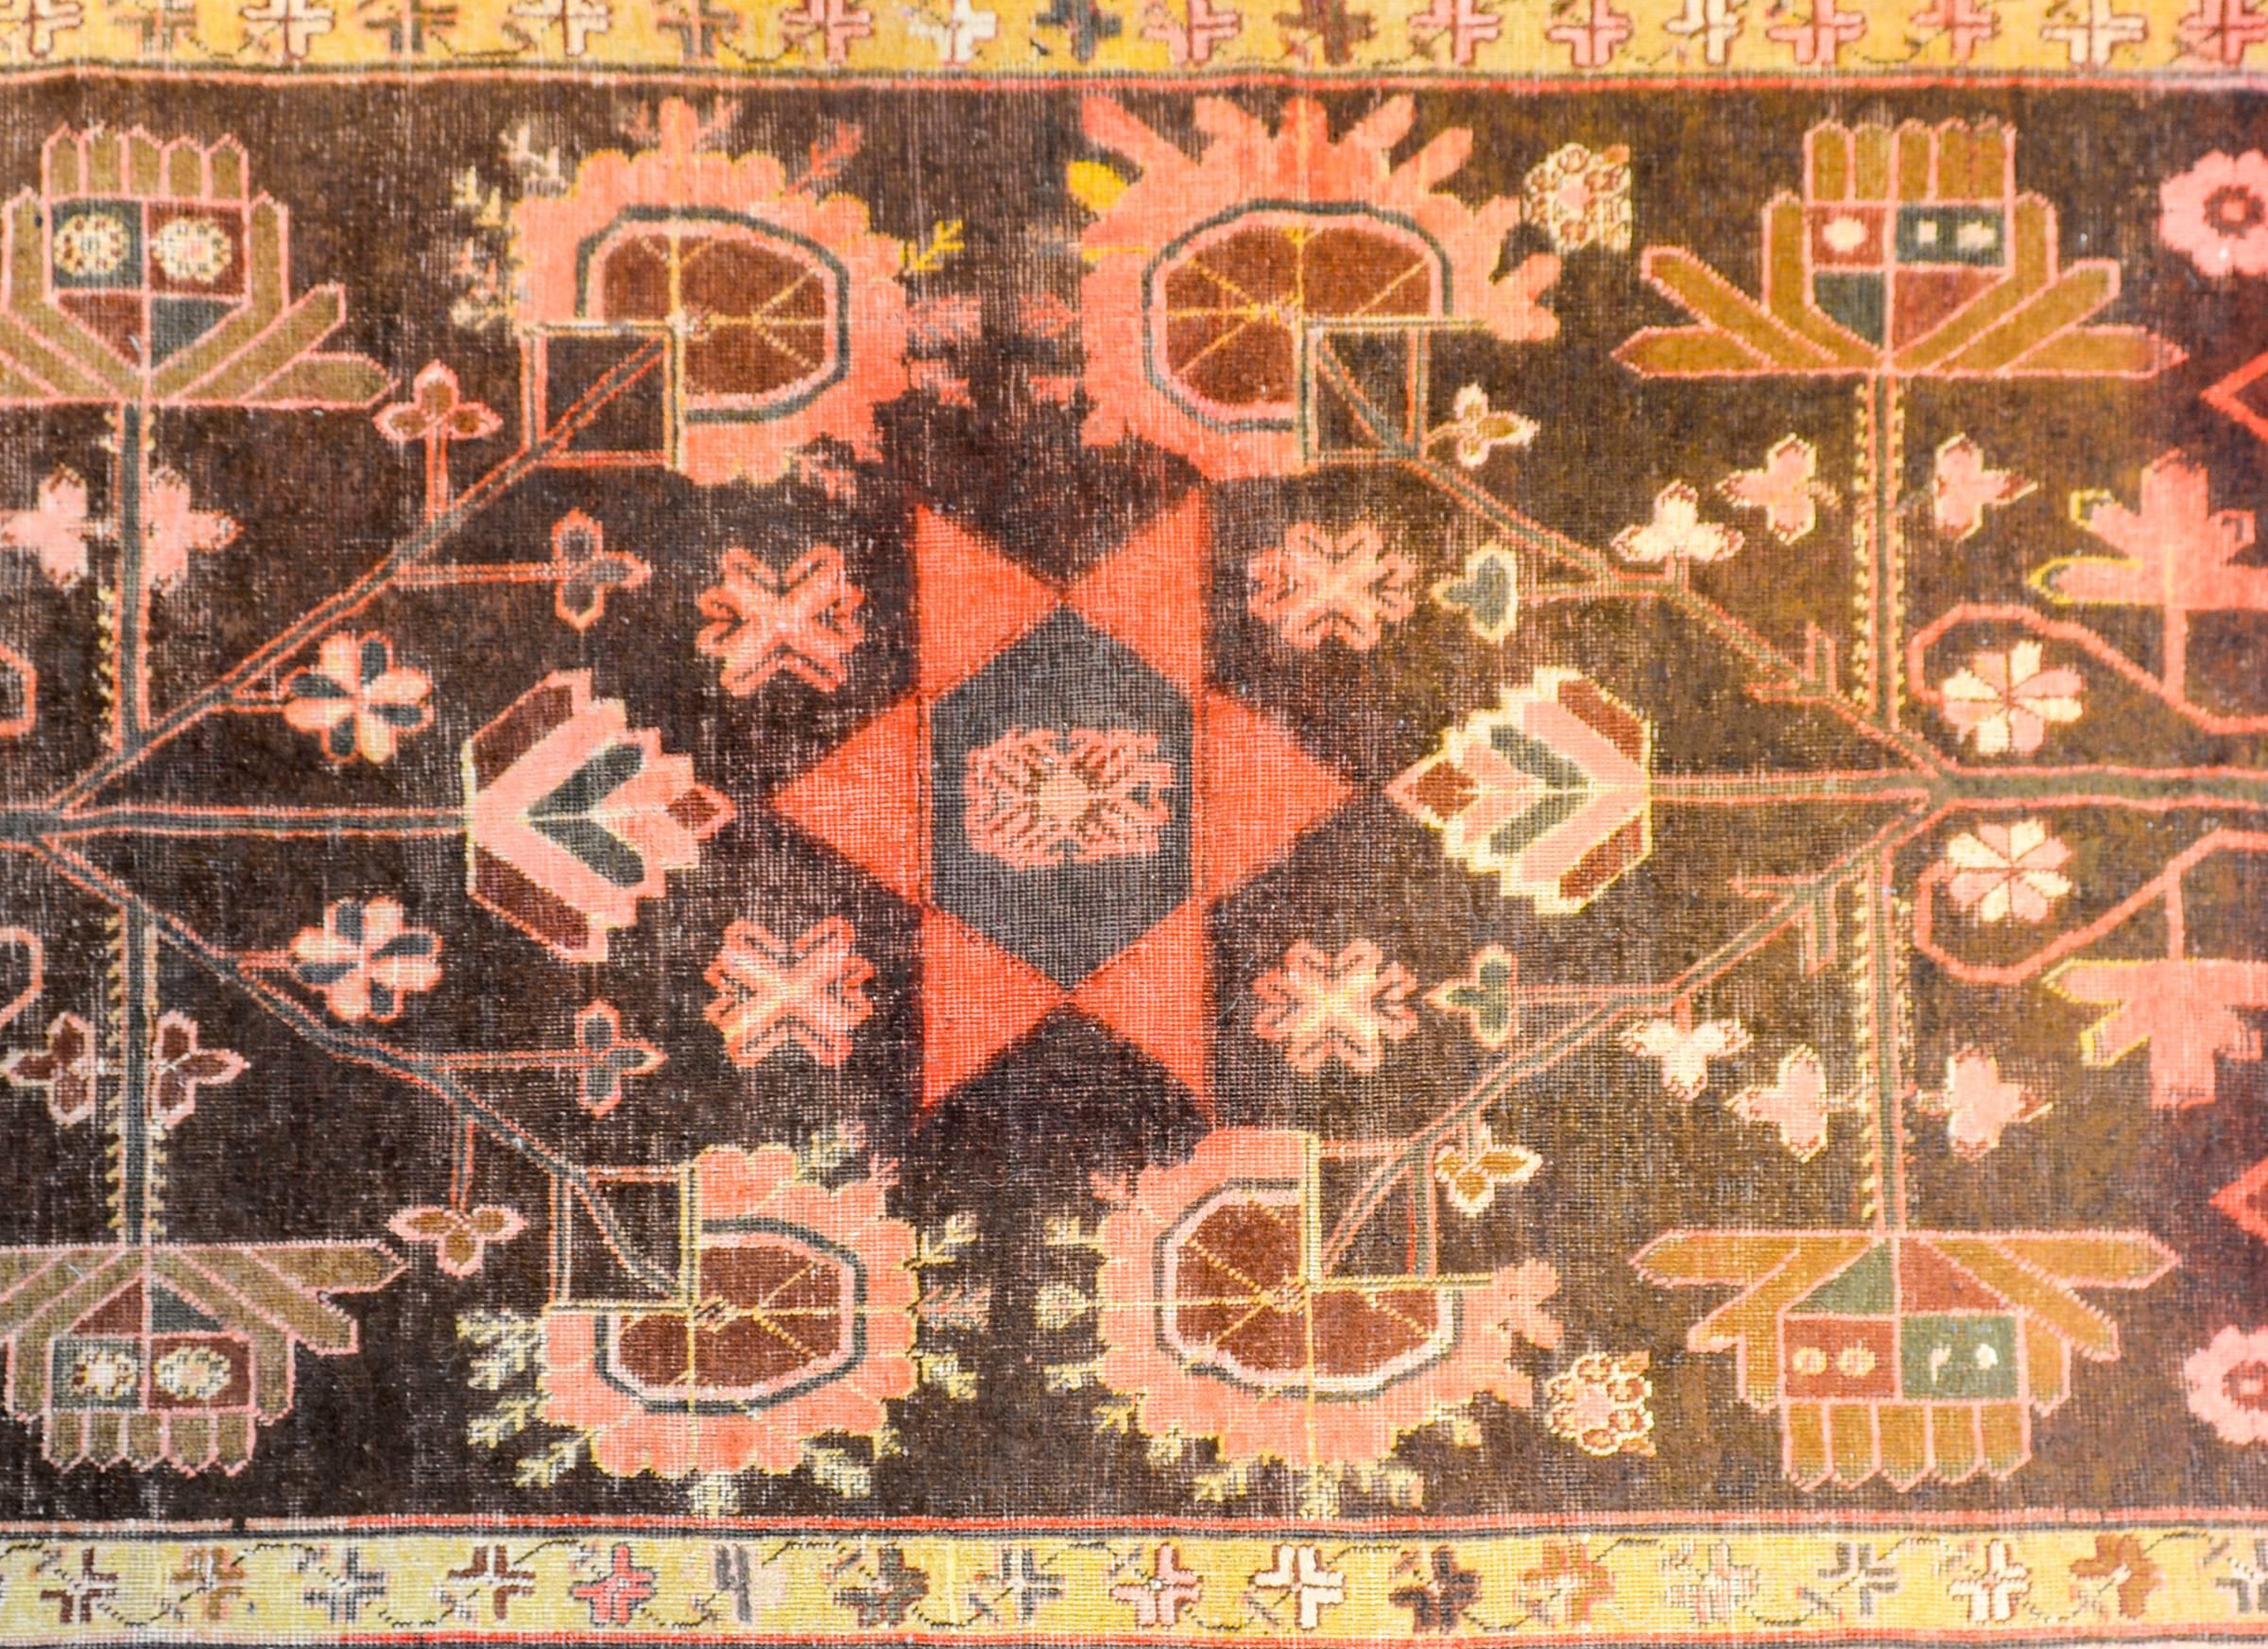 An unusual early 20th Century Central Asian Khotan rug with a wonderful pattern containing five Stars of David, amidst a field of mirrored trees-of-life, all woven in crimson, gold, pink, and grey colored wool, on a natural brown colored background.